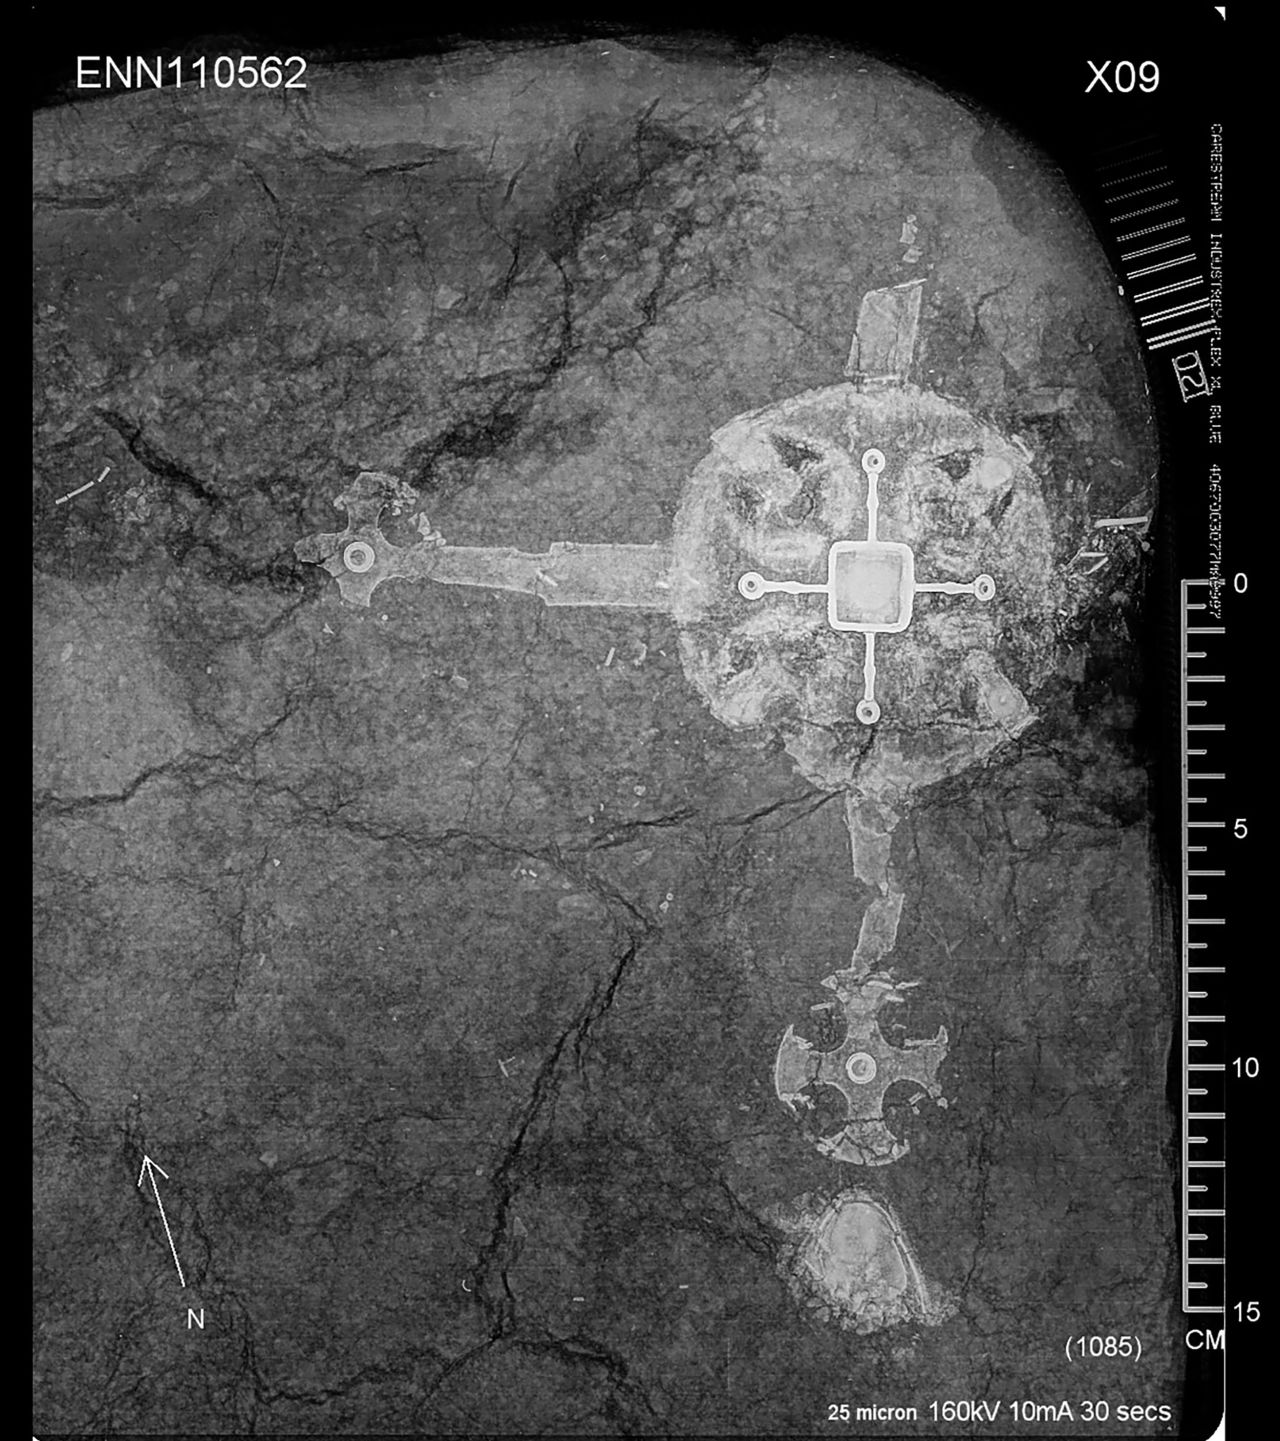 X-rays taken of blocks of soil removed from the grave site revealed an ornately decorated cross cast in silver and mounted on wood. 